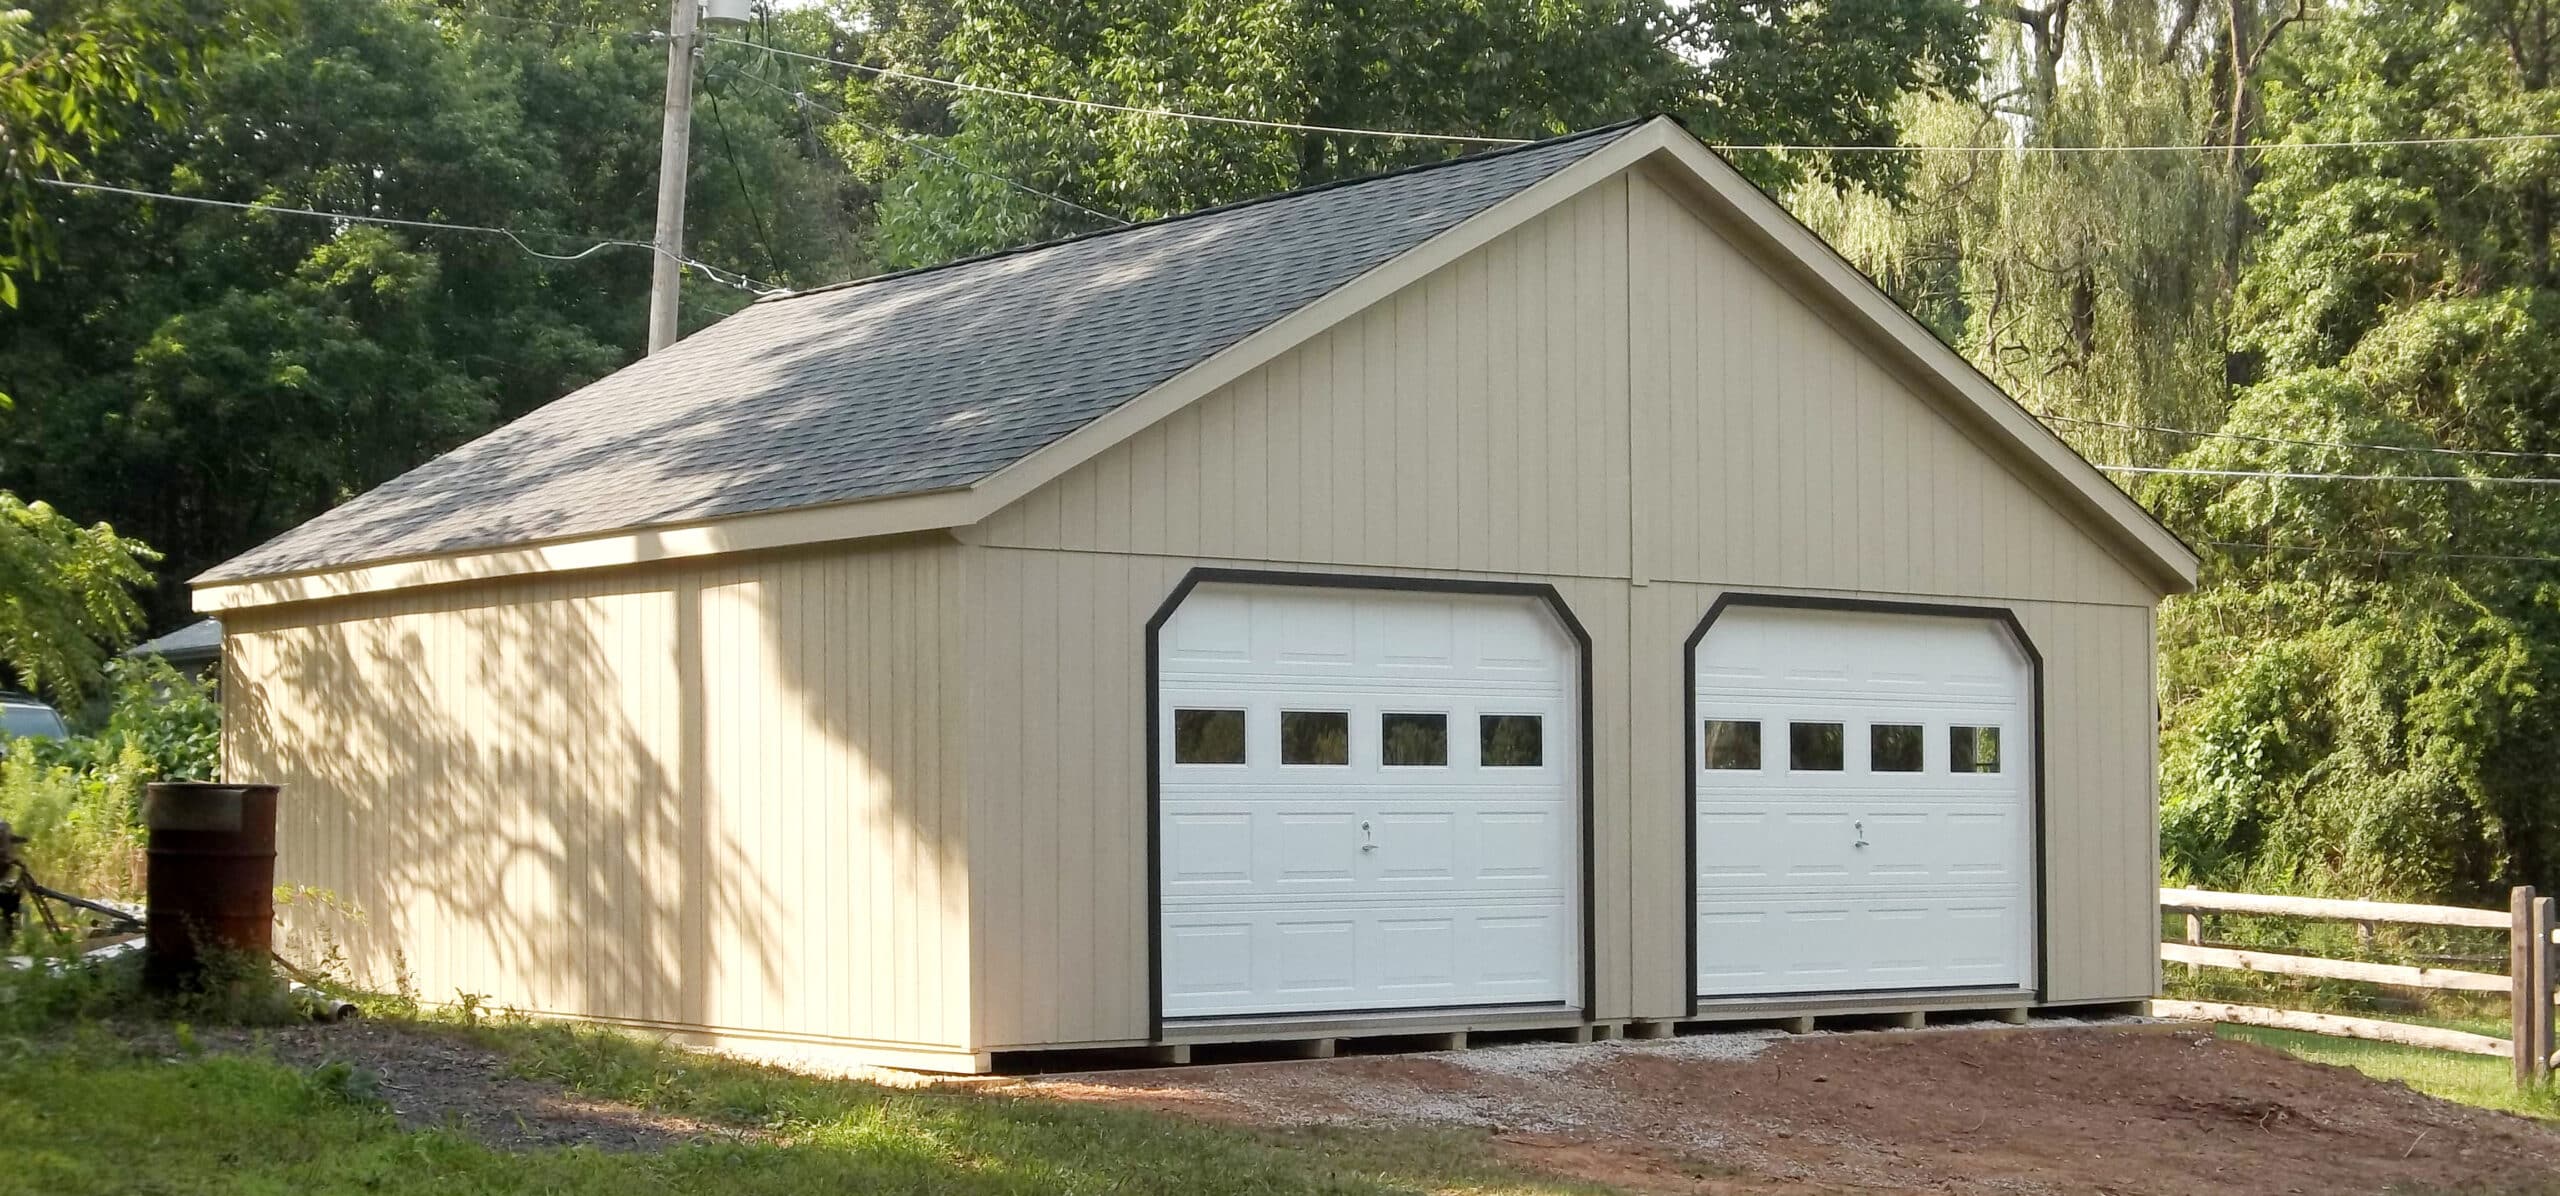 two car garages